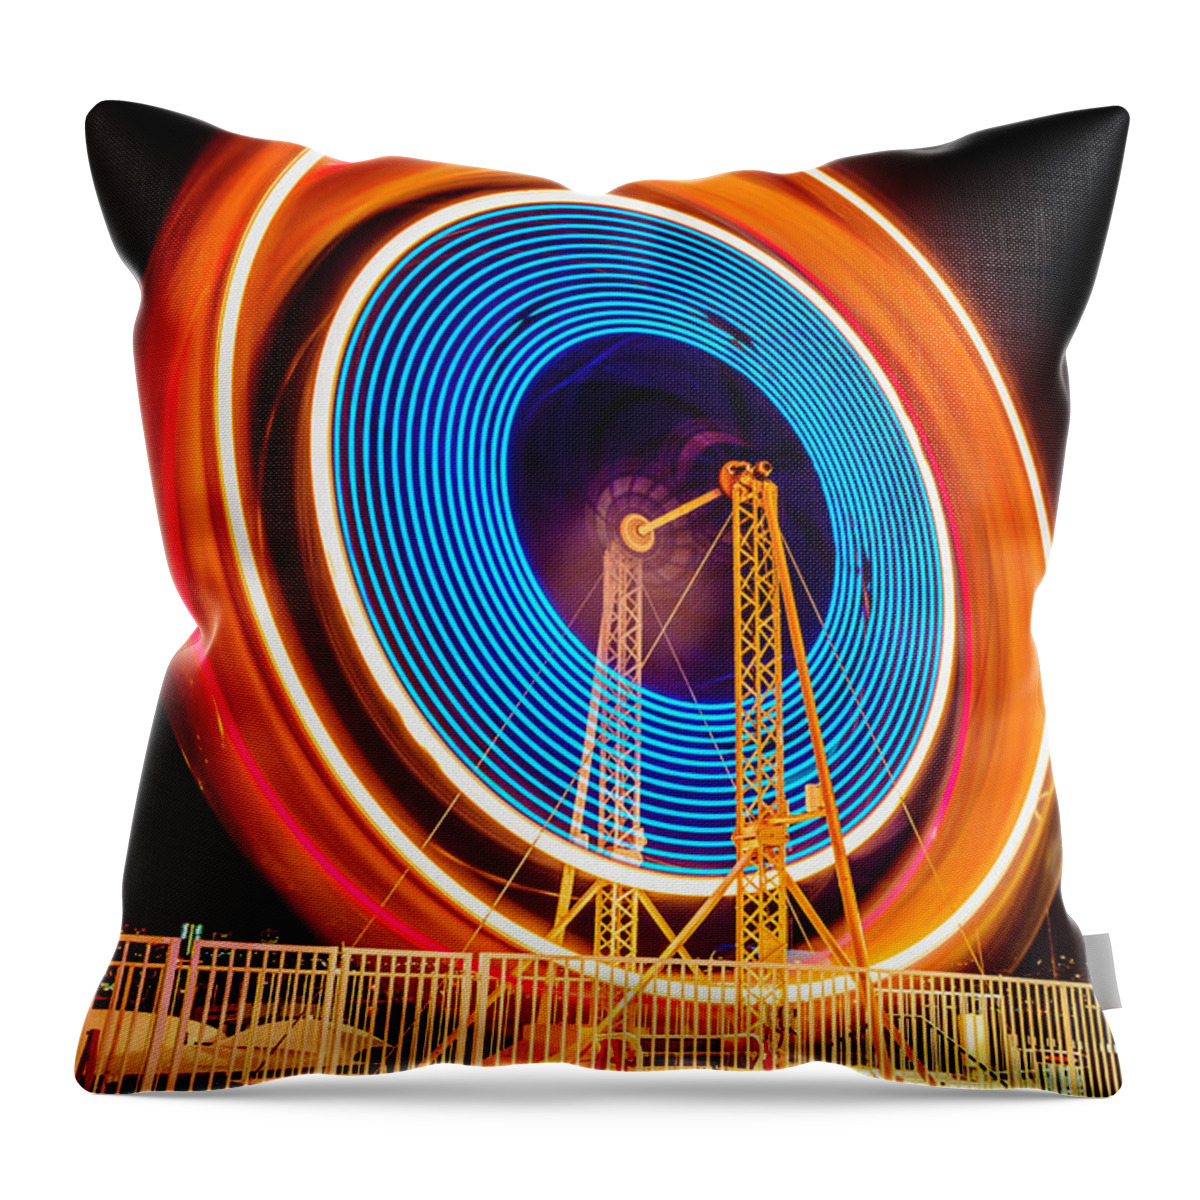 America Throw Pillow featuring the photograph Balboa Fun Zone Ferris Wheel at Night Picture by Paul Velgos